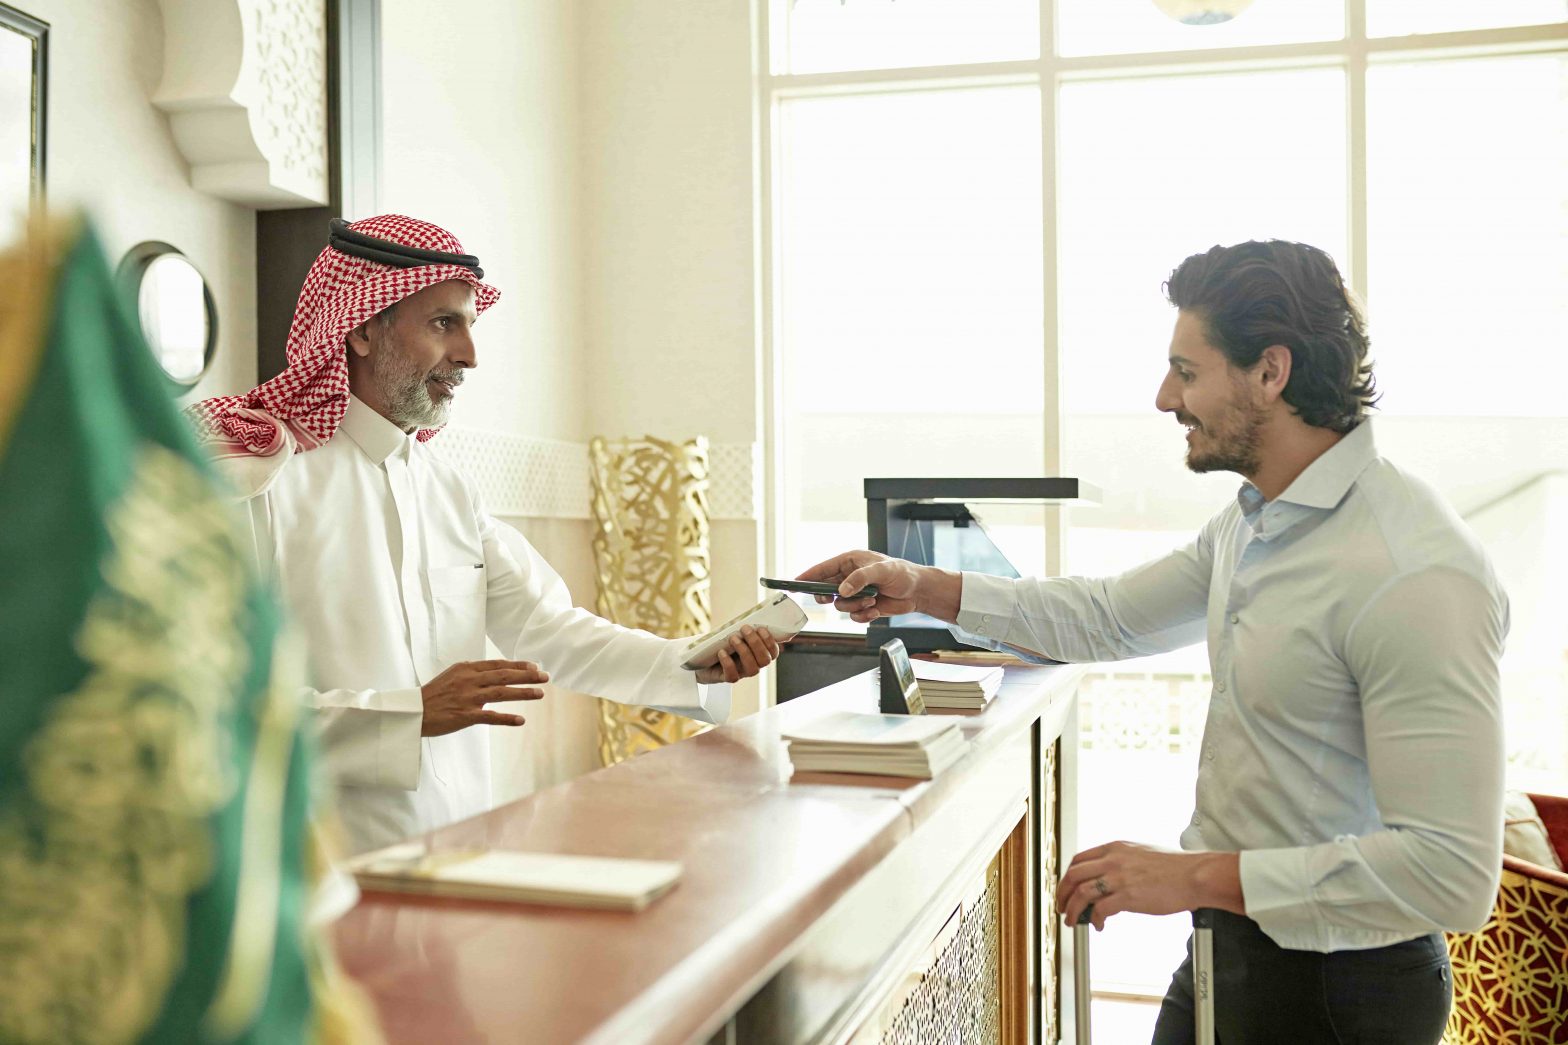 KSA hospitality worker interacting with a customer after being empowered by training